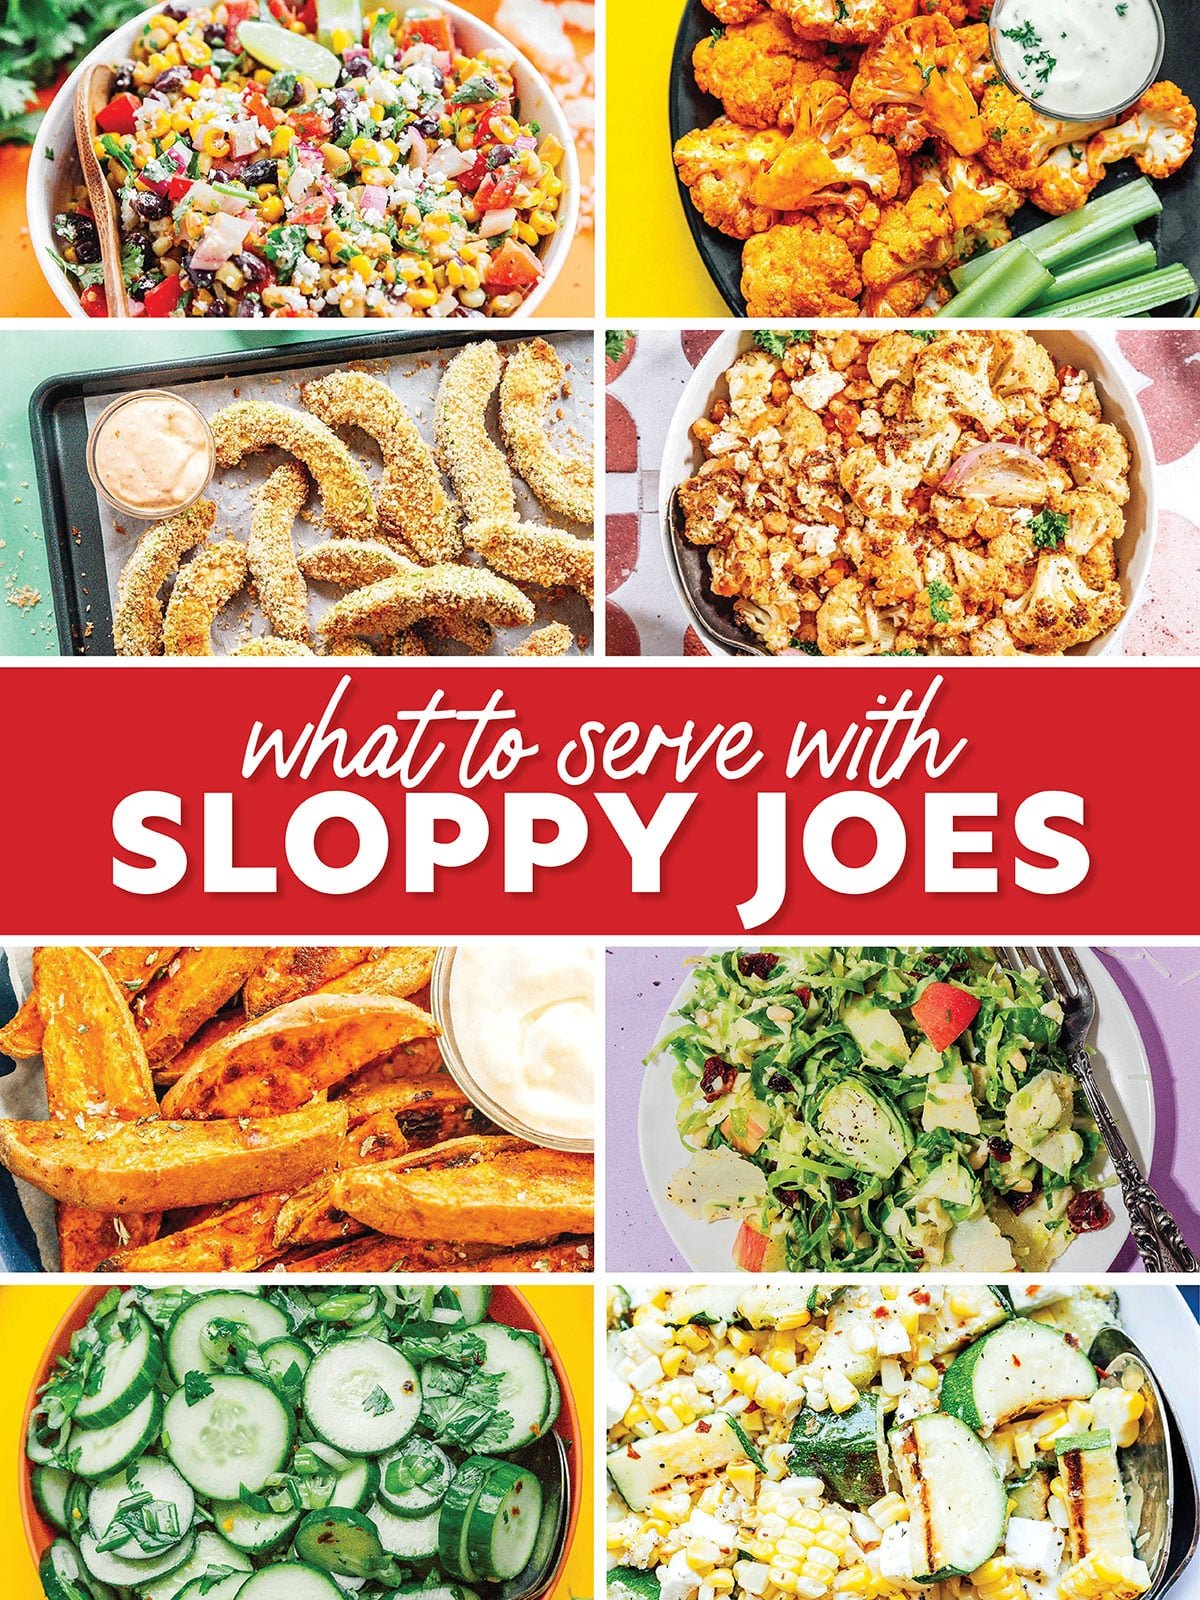 Collage that says "what to serve with sloppy joes".